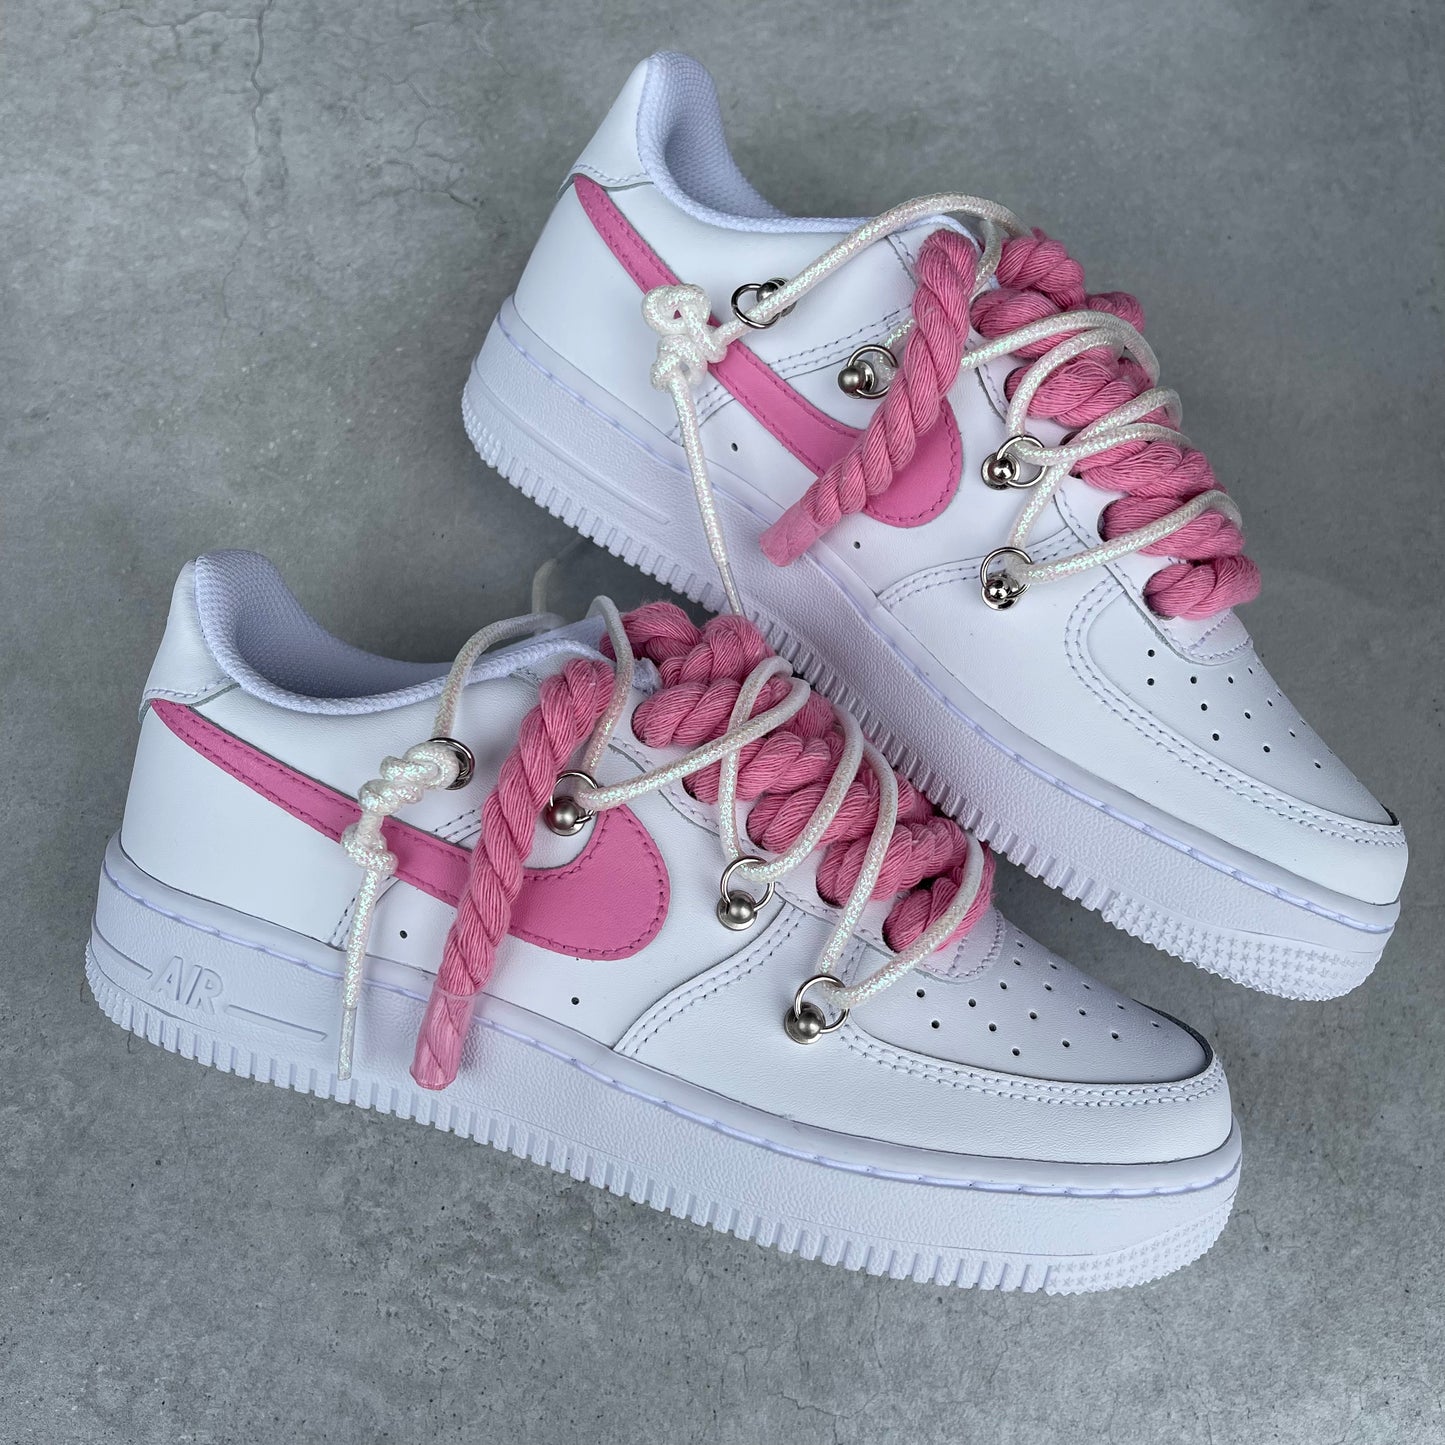 Custom AIR FORCE 1 - Pink lot (rope laces)